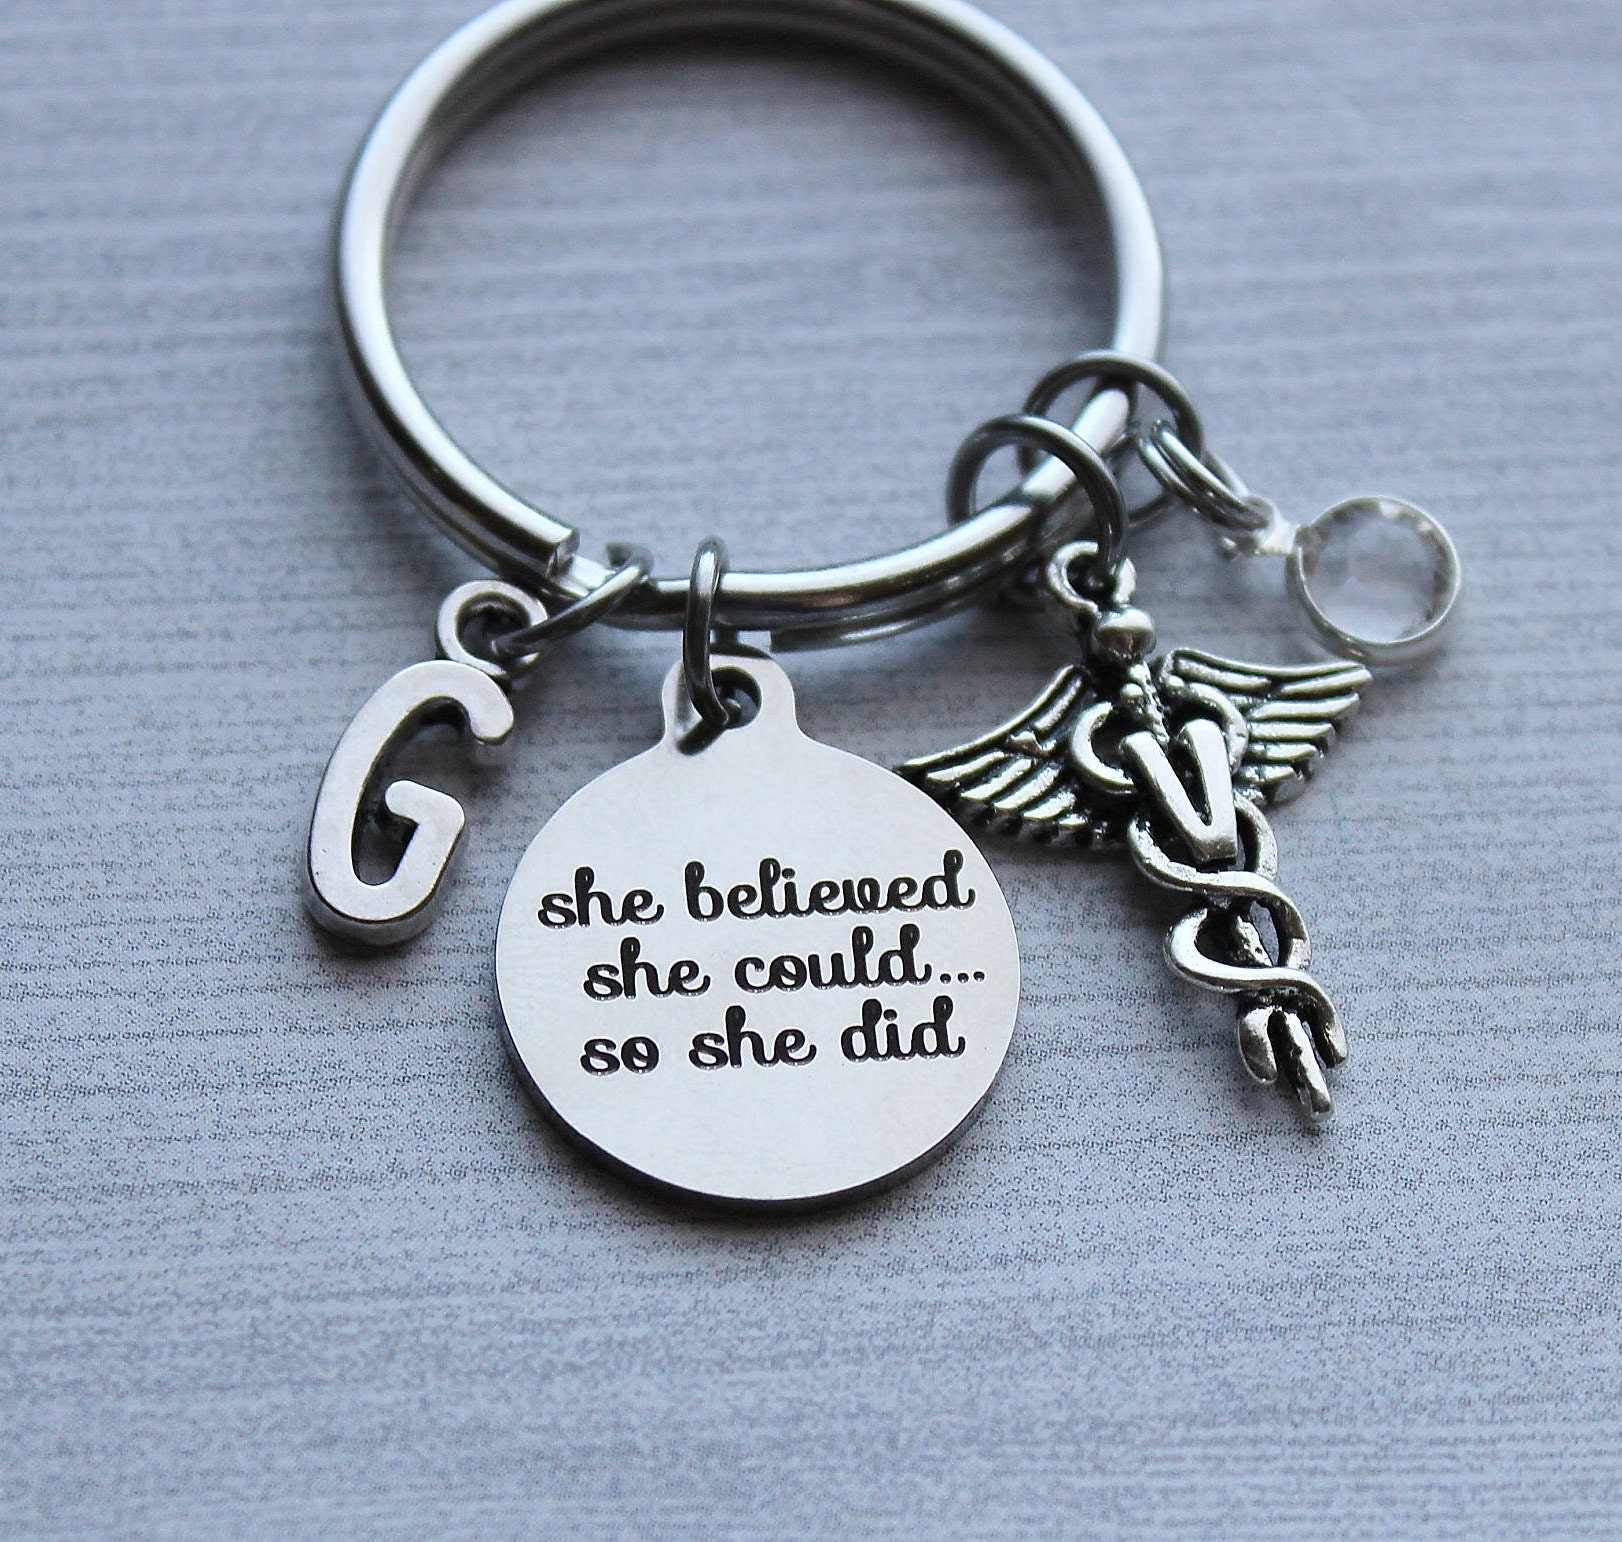 FUTOP Veterinarian Gifts She Believed She Could So She Did Keychain Veterinary Technician Gifts Vet Tech Jewelry